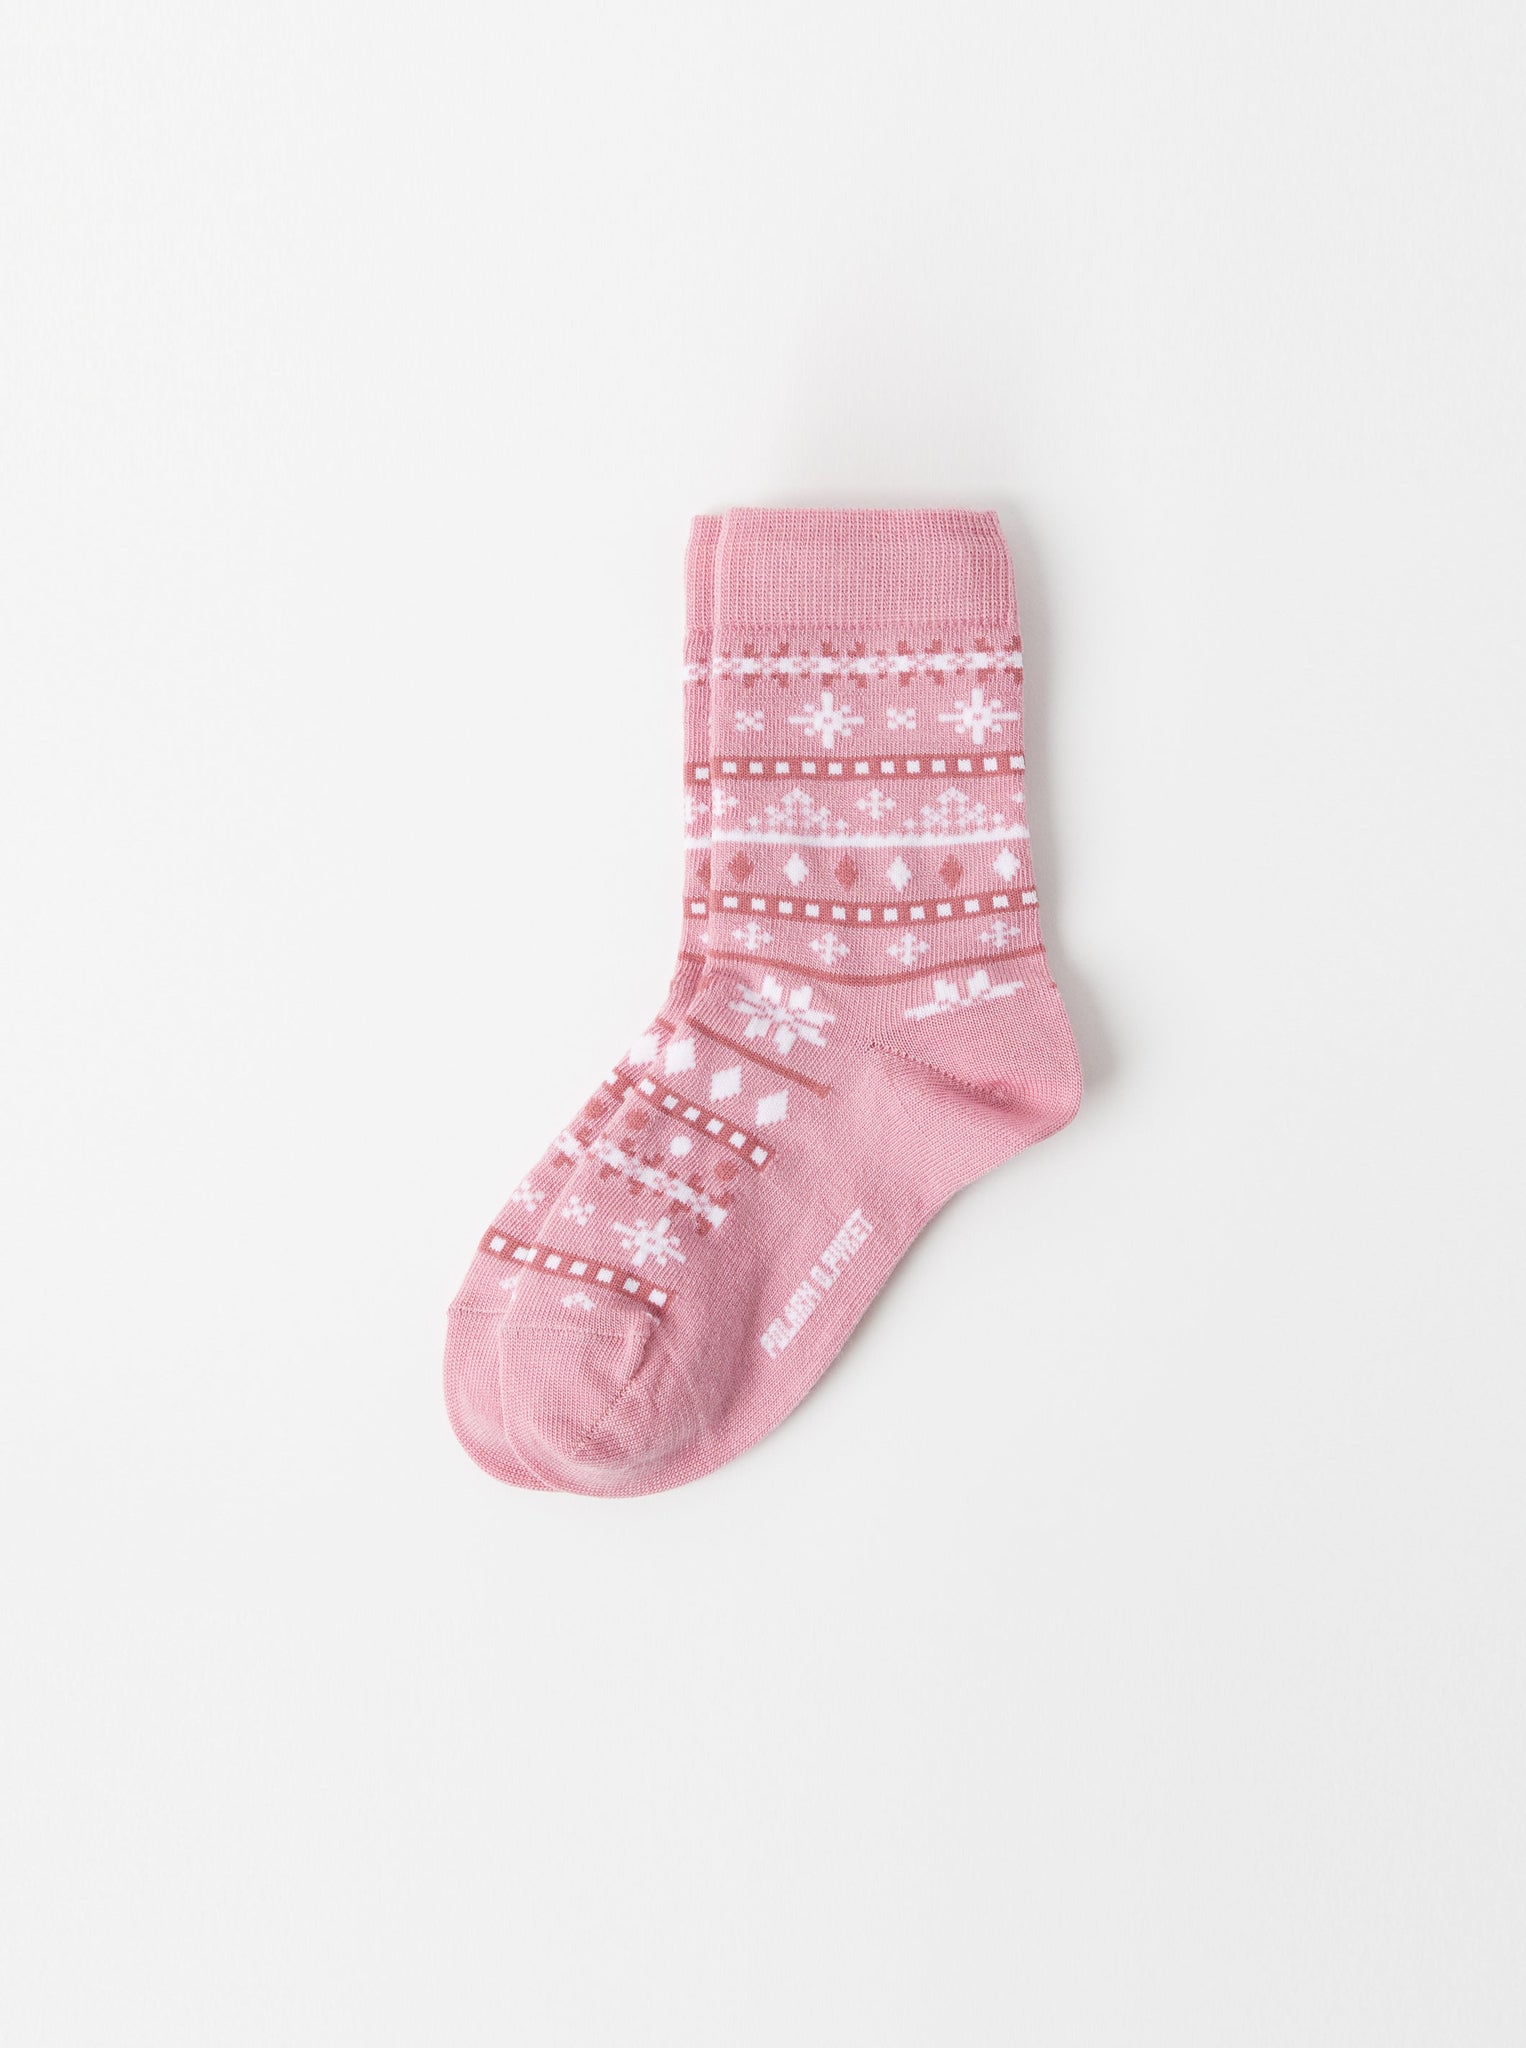 Pink Merino Wool Kids Socks from the Polarn O. Pyret kidswear collection. The best ethical kids outerwear.